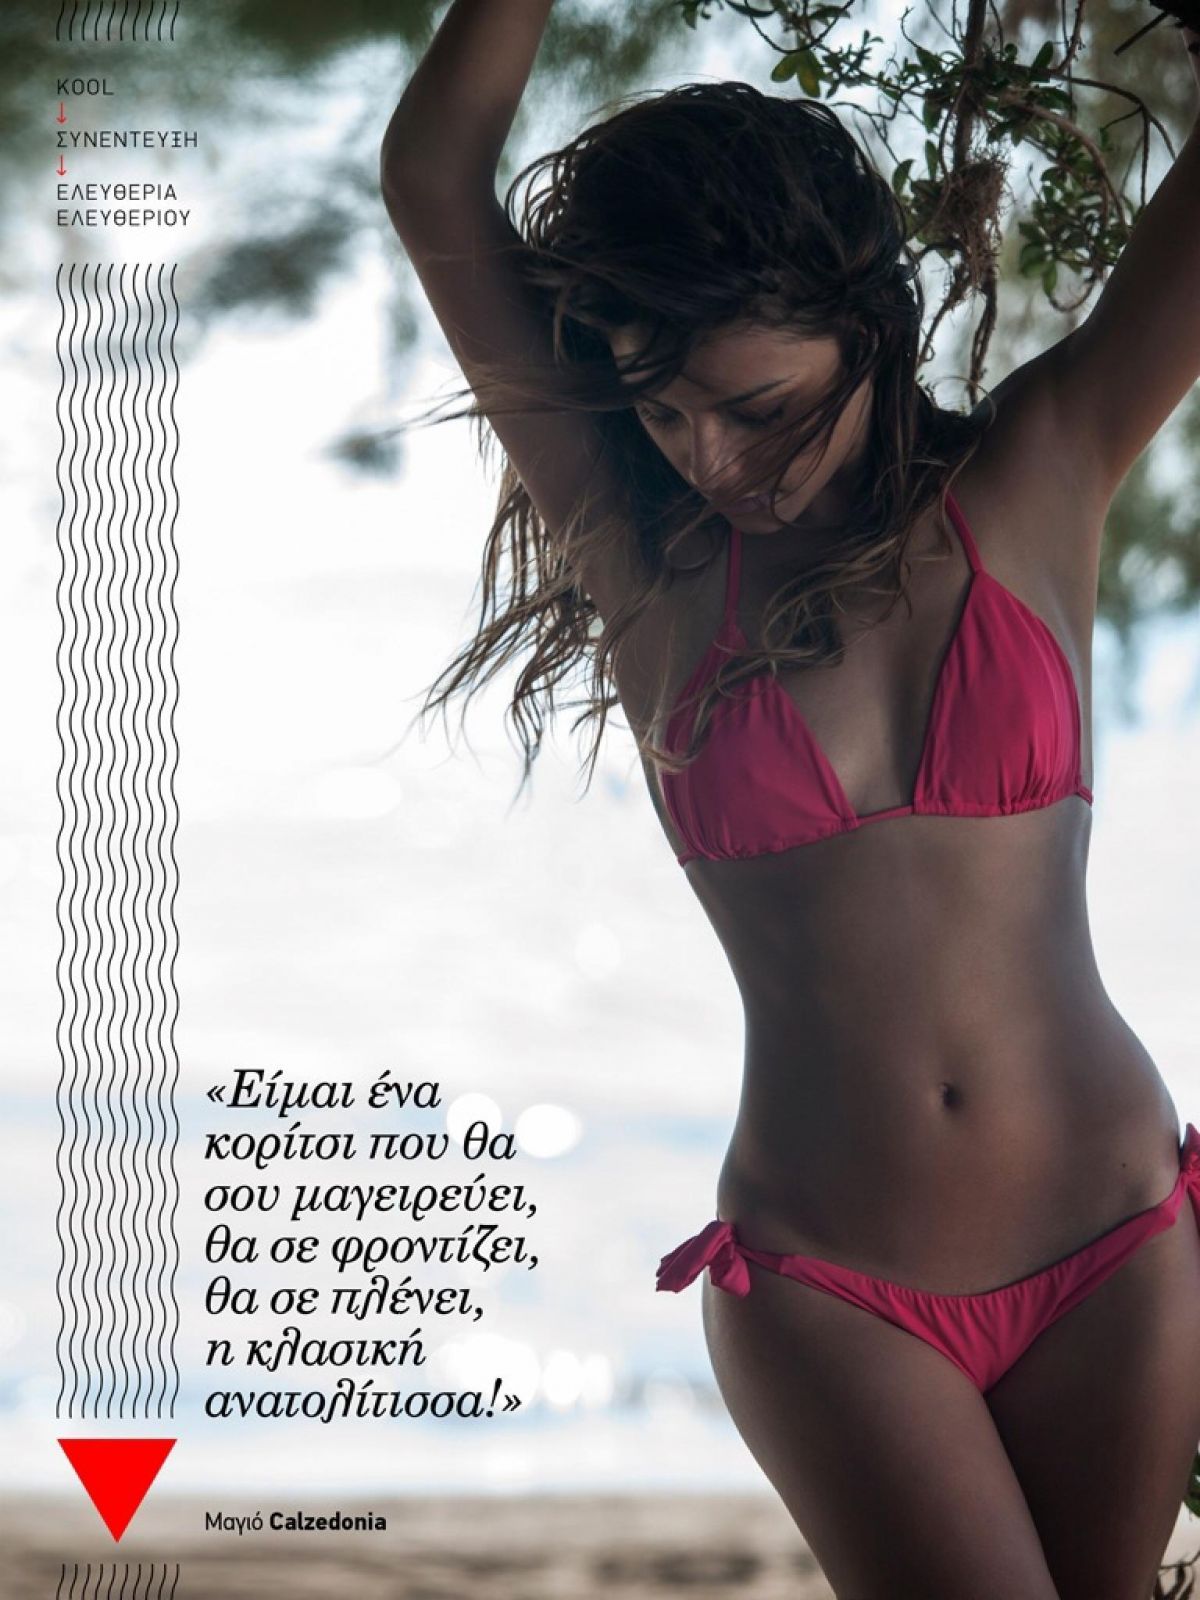 EFTHERIA ELEUTHERIOU in Kool Magazine, Greece August 2014 Issue